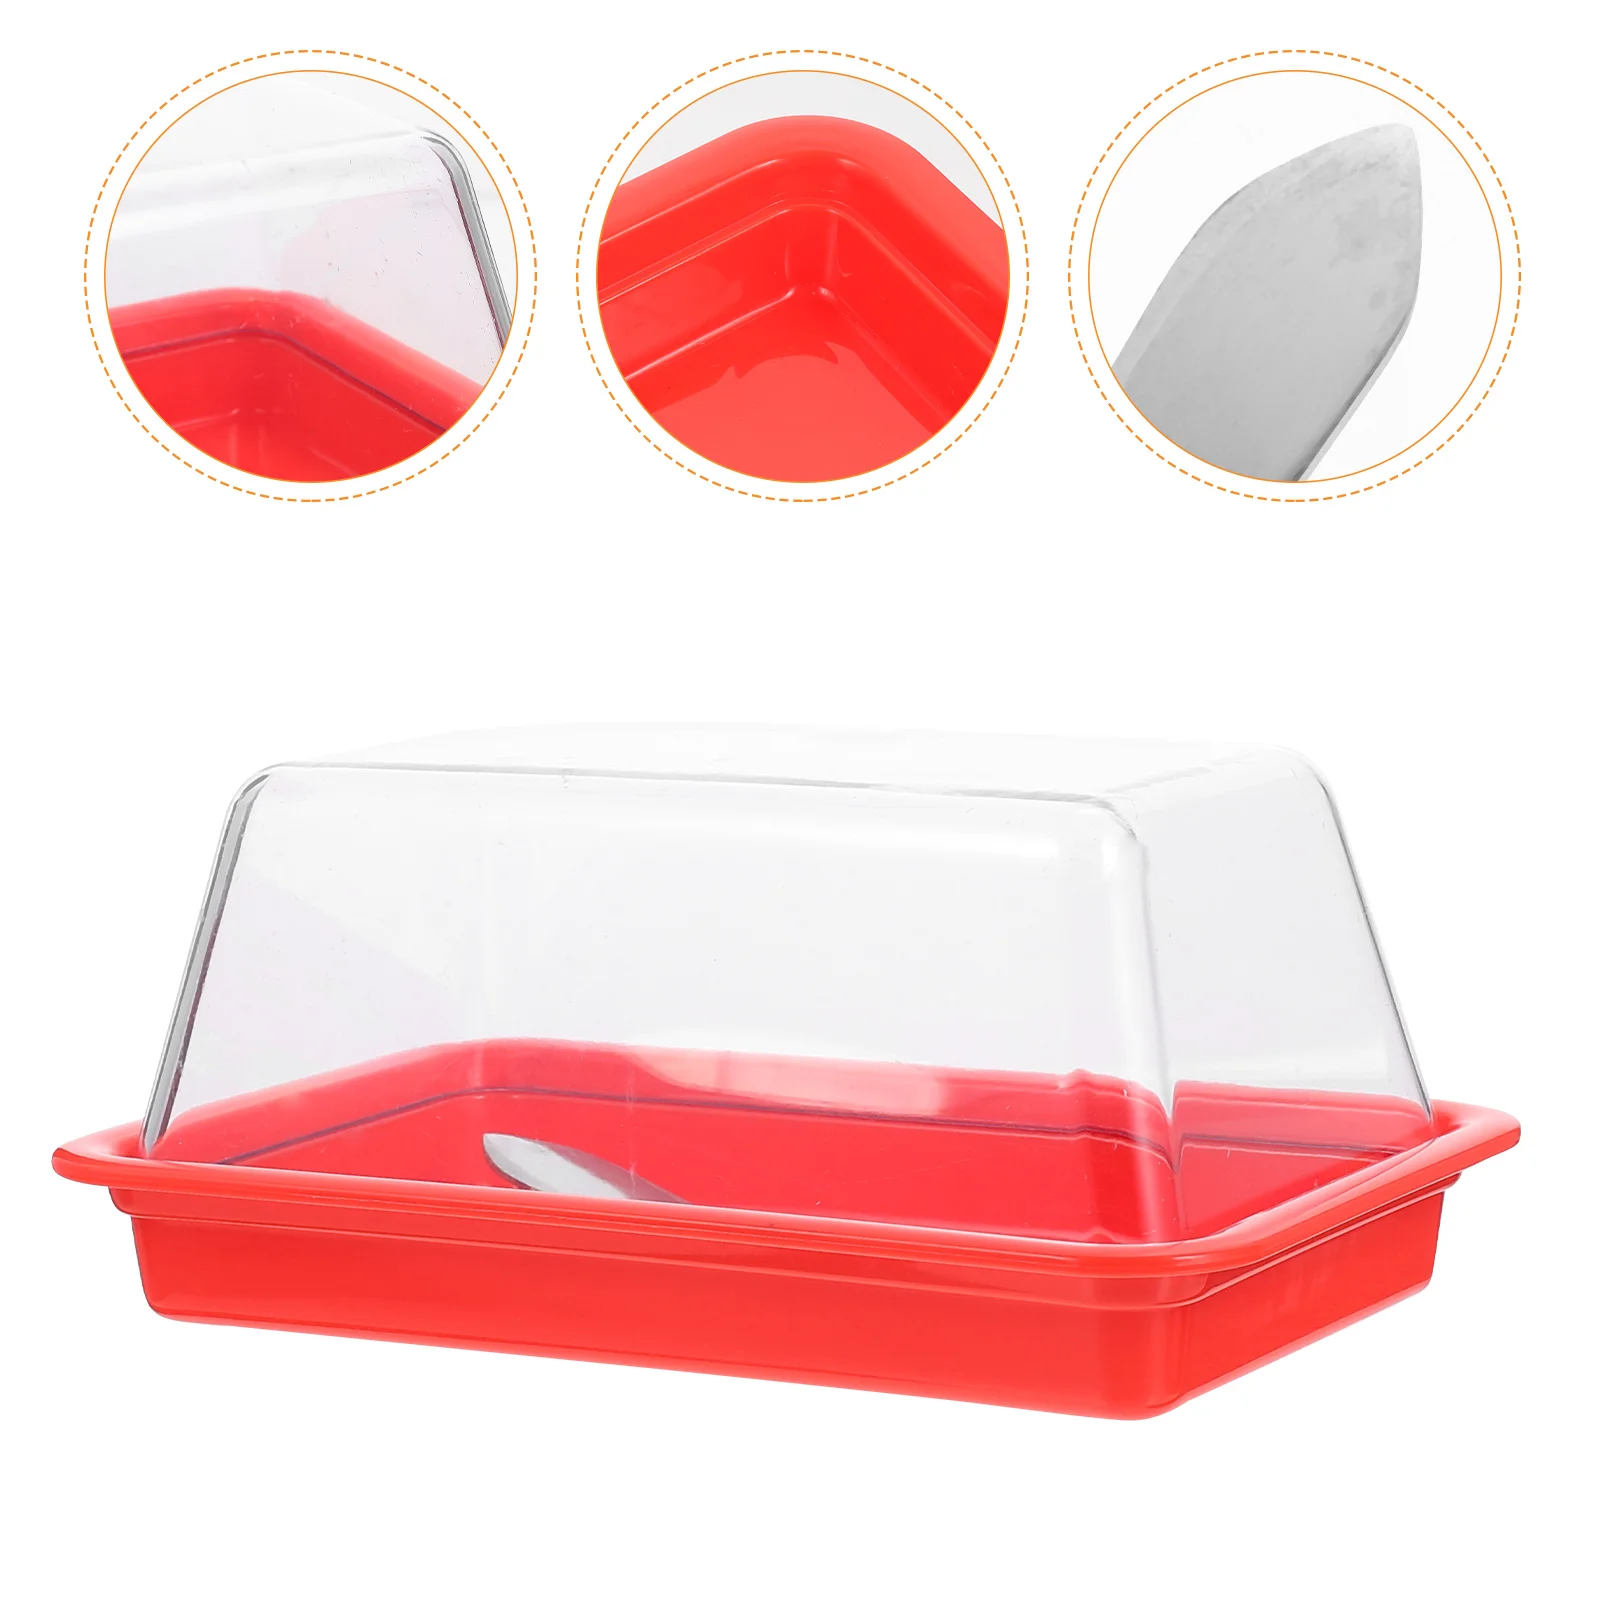 

Butter Dish Holder Cheese Dishescake Plate Container Tray Plasticbox Stick Fridge Dome Crock Server Saver Coveredcover Storage